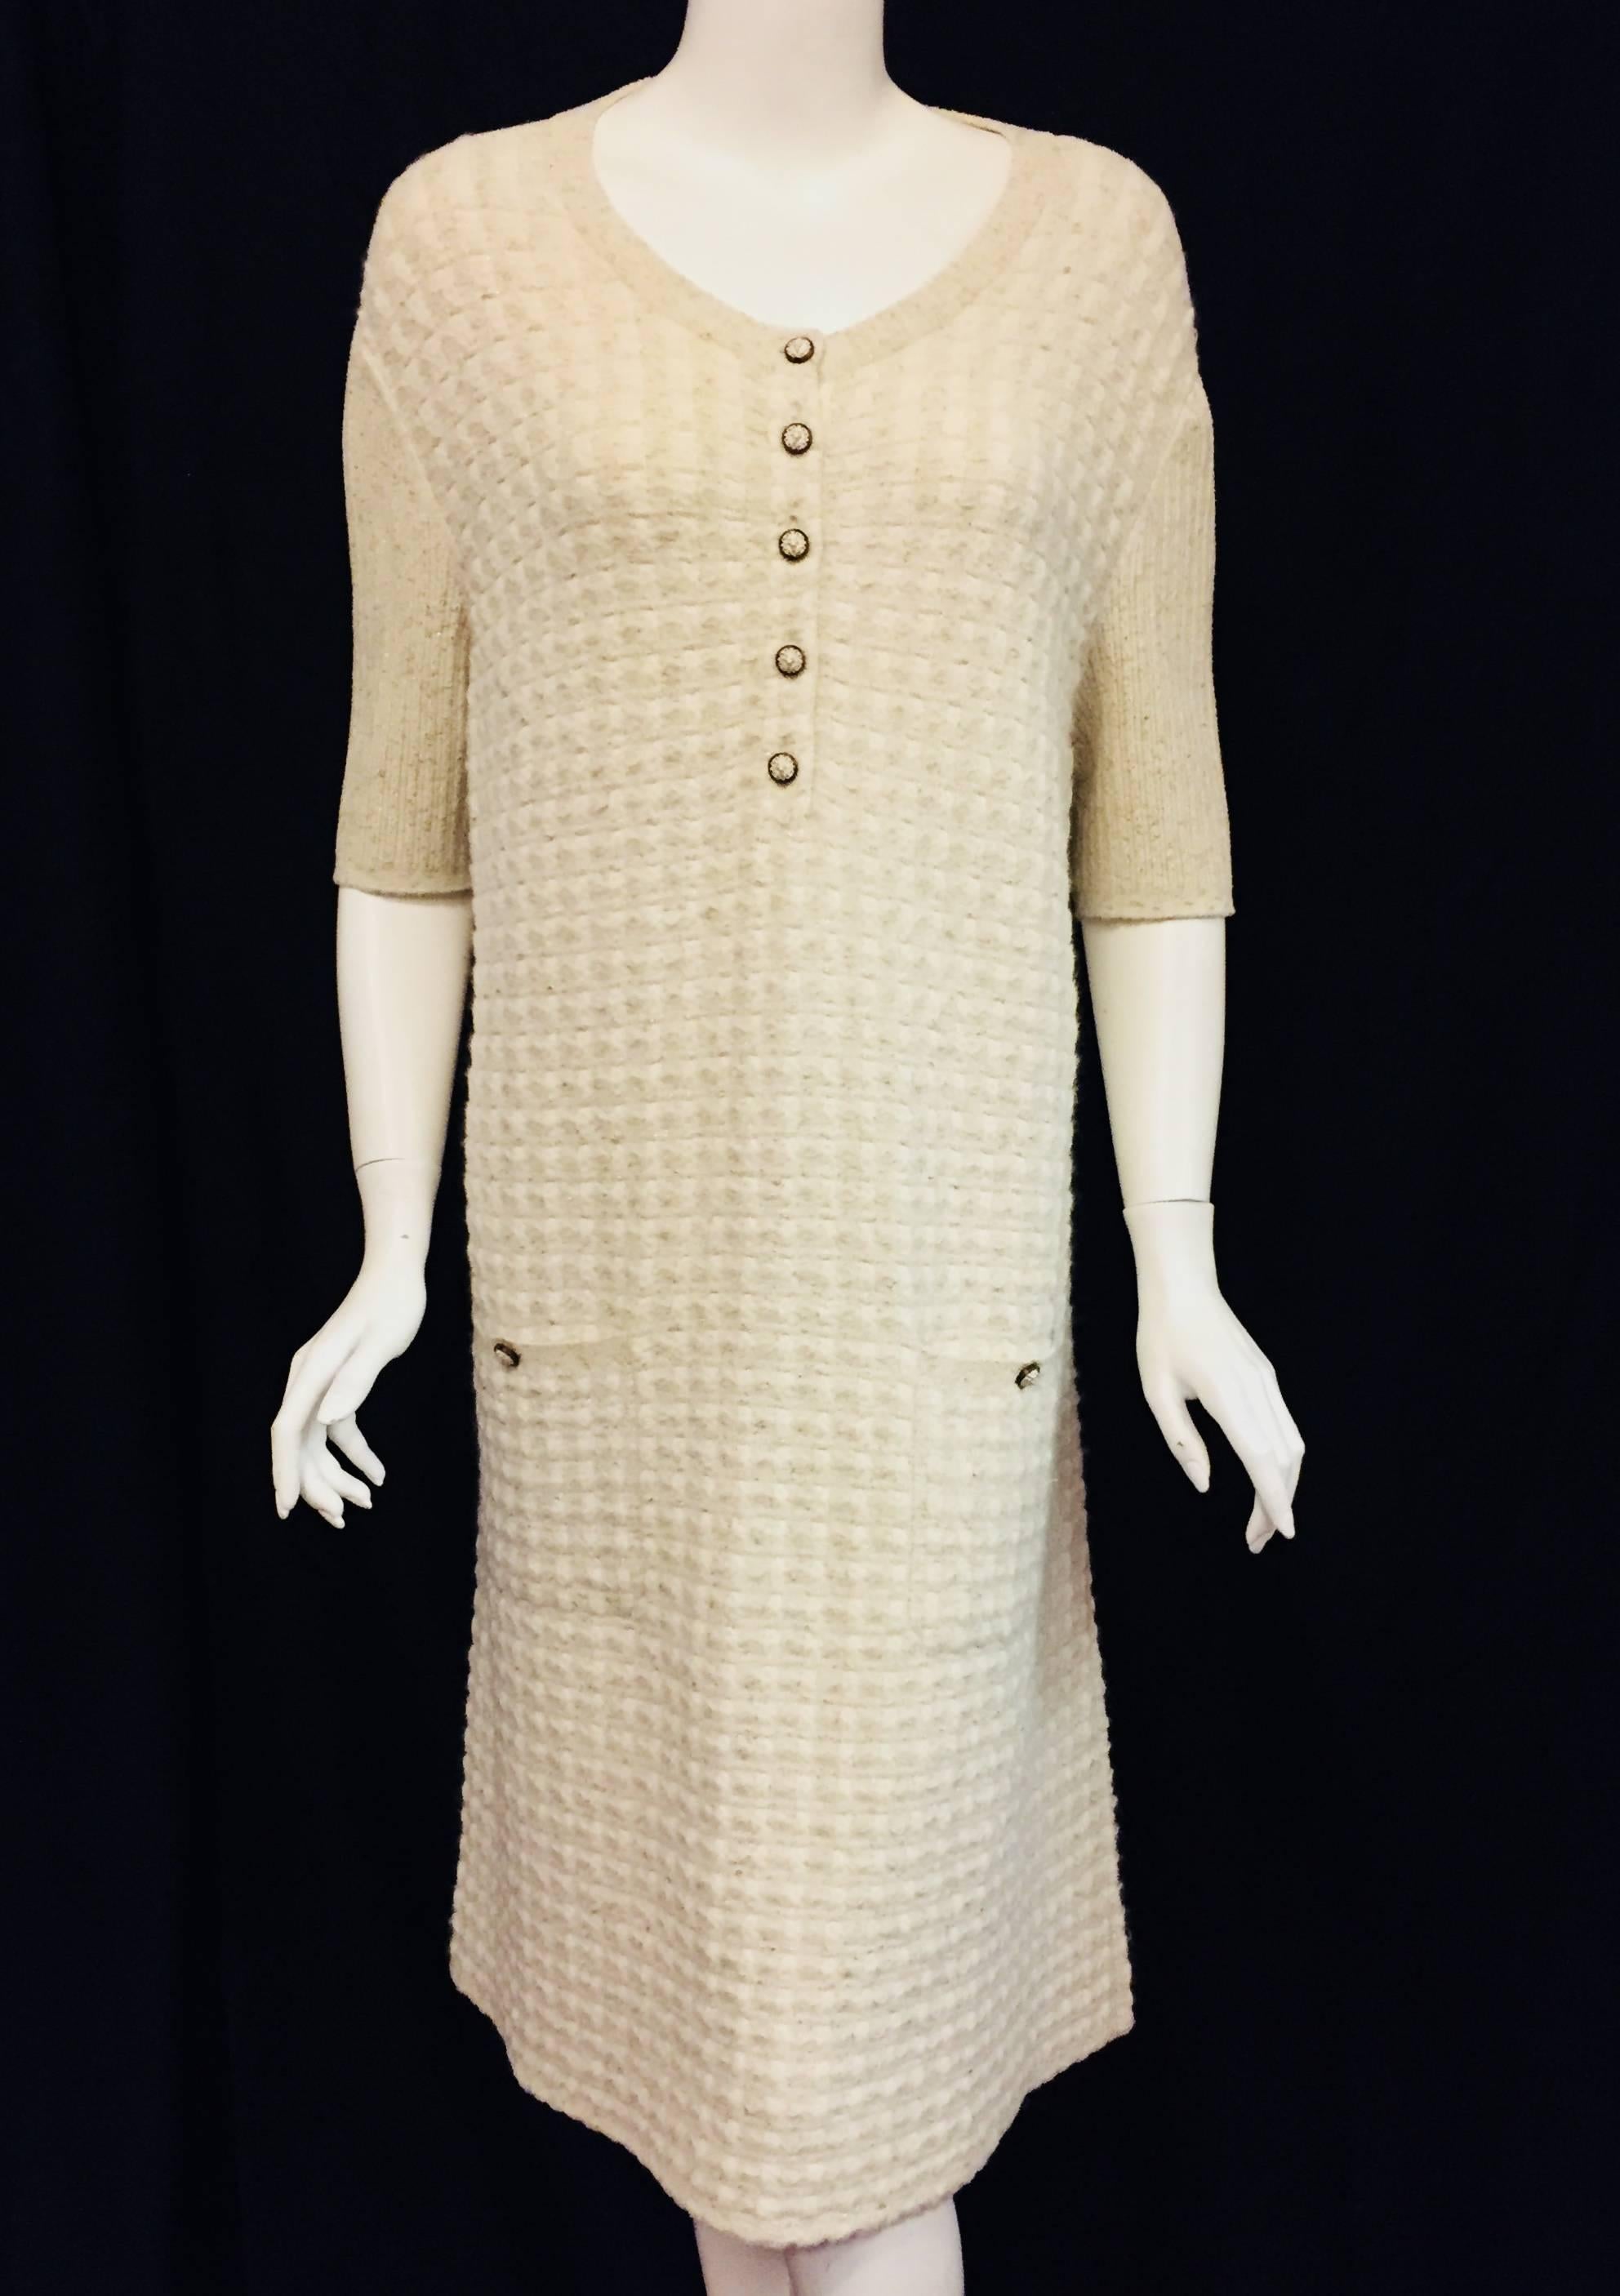 This Chanel ivory mohair, rayon and wool knit dress features 3/4 length sleeves and showcases 5 decorative Chanel buttons at front for closure.  This sheath dress is textured throughout and features gold tone threads allover.  Each patch pocket has